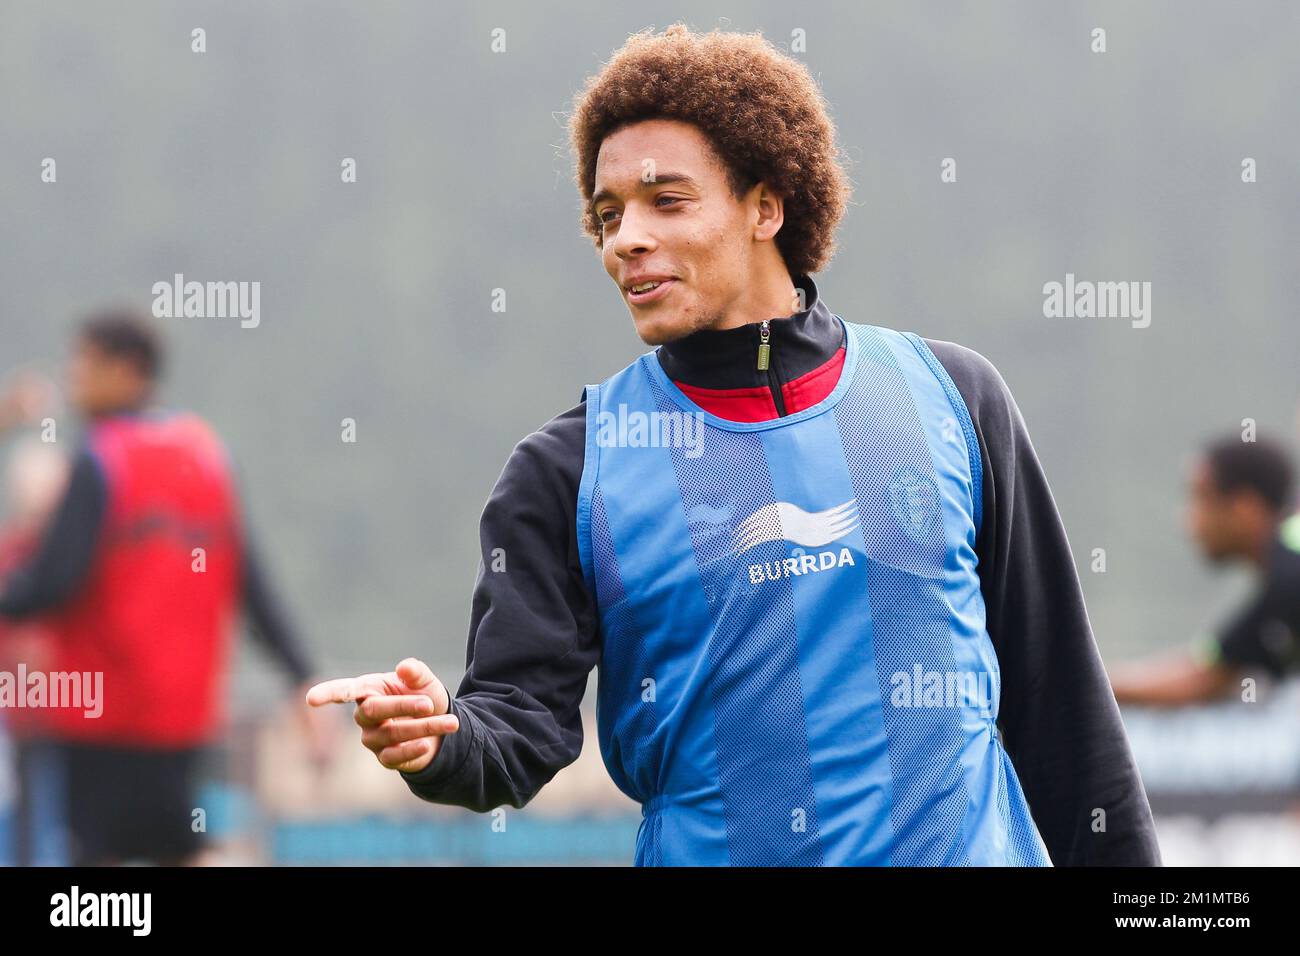 20120523 - ZAVENTEM, BELGIUM: Belgium's Axel Witsel pictured during a training session of the Red Devils, the Belgian national soccer team, in Zaventem, Wednesday 23 May 2012. The team is preparing for a friendly game against Montenegro later this week on 25 May. BELGA PHOTO BRUNO FAHY Stock Photo